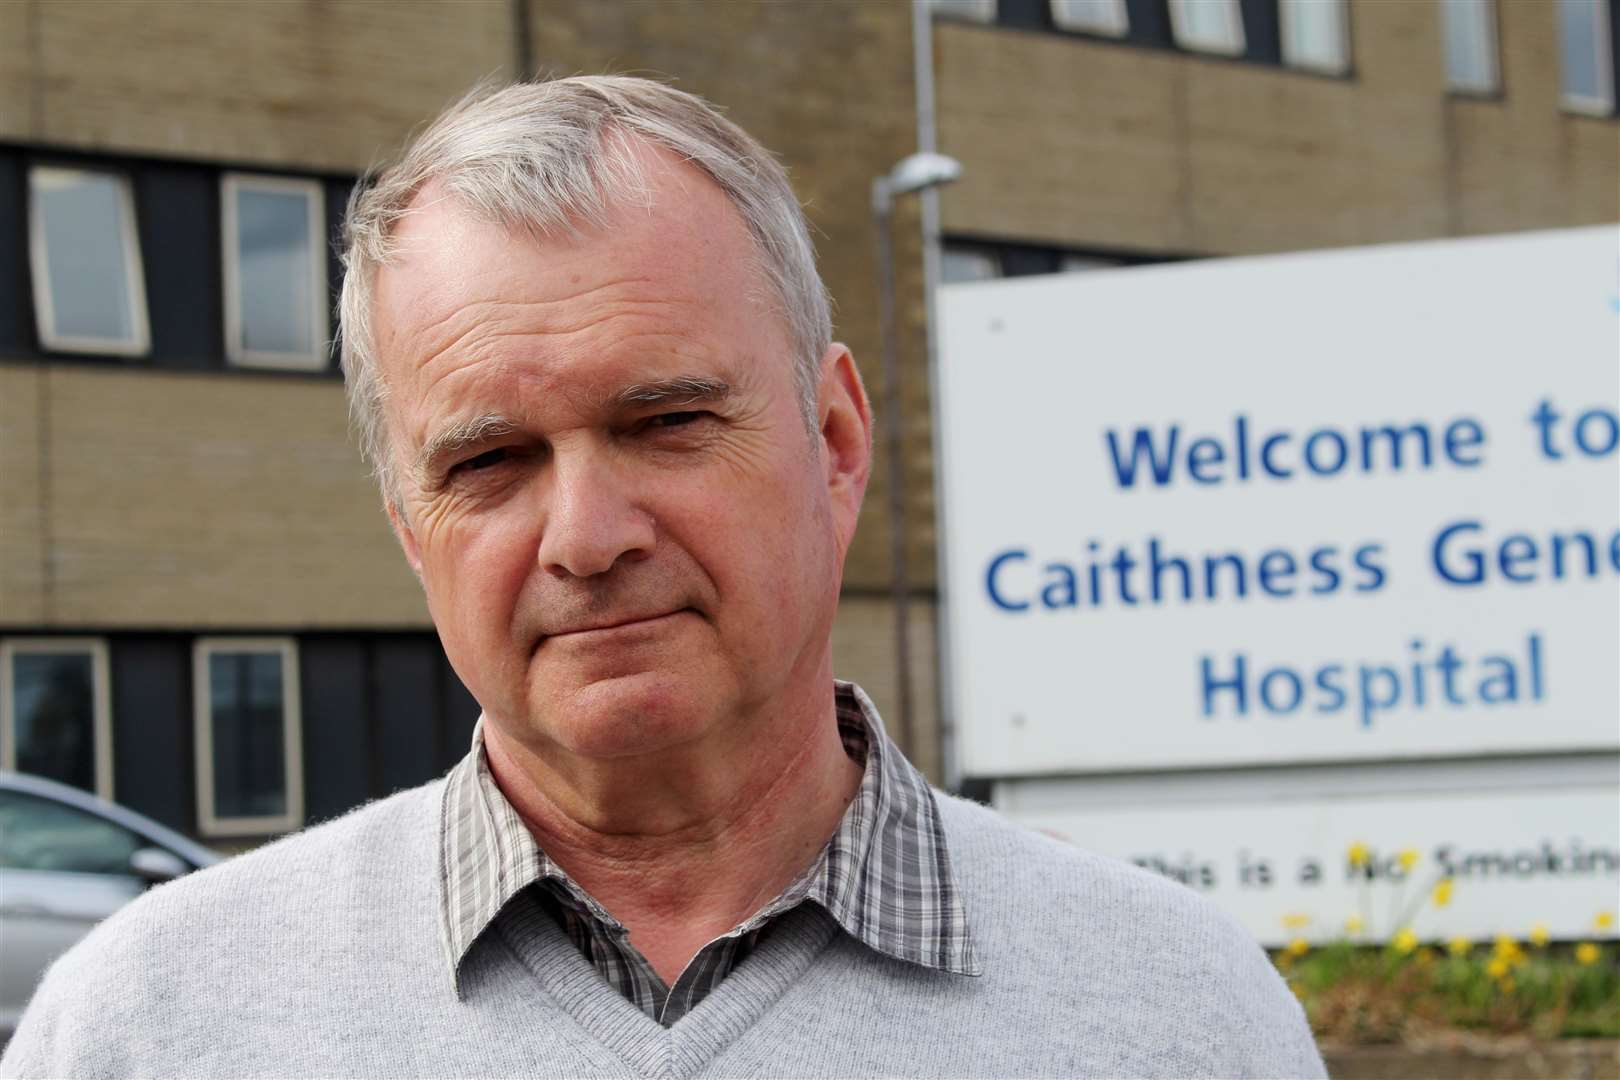 Ron Gunn urged Scotland's new health secretary Neil Gray to visit Caithness and meet with CHAT. Picture: Alan Hendry